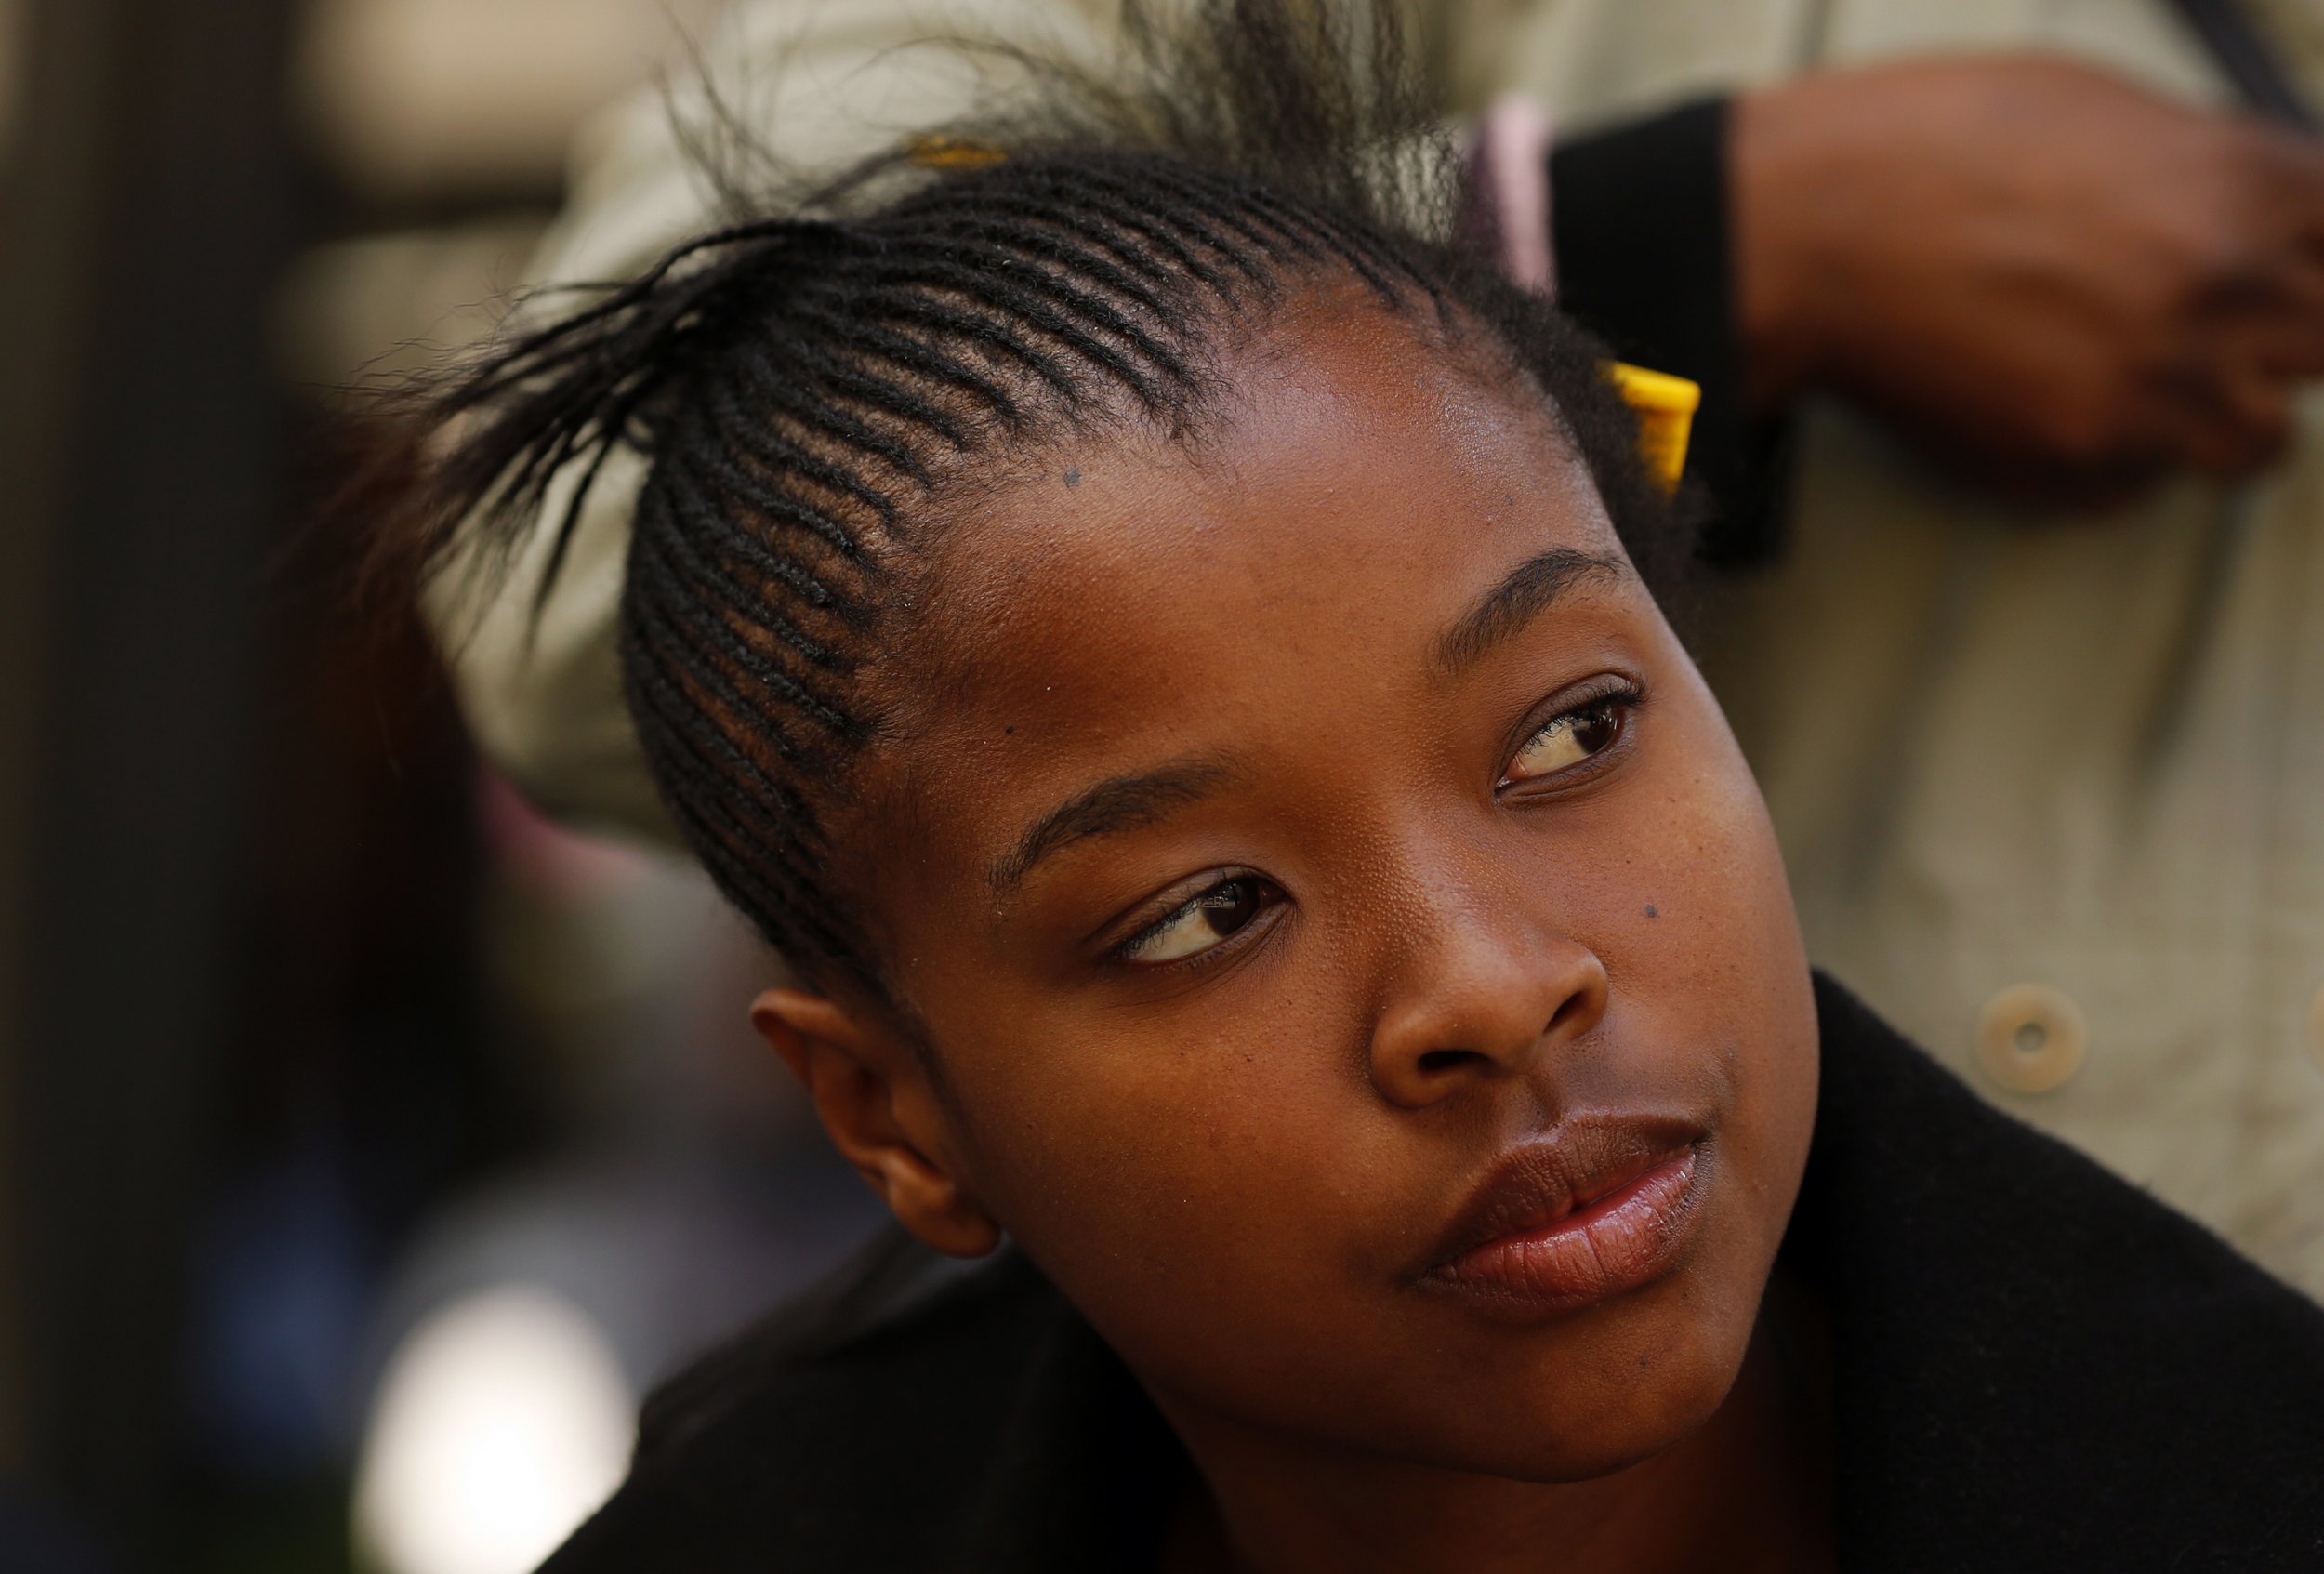 50+ best hairstyles for black women in South Africa 2023 - Briefly.co.za